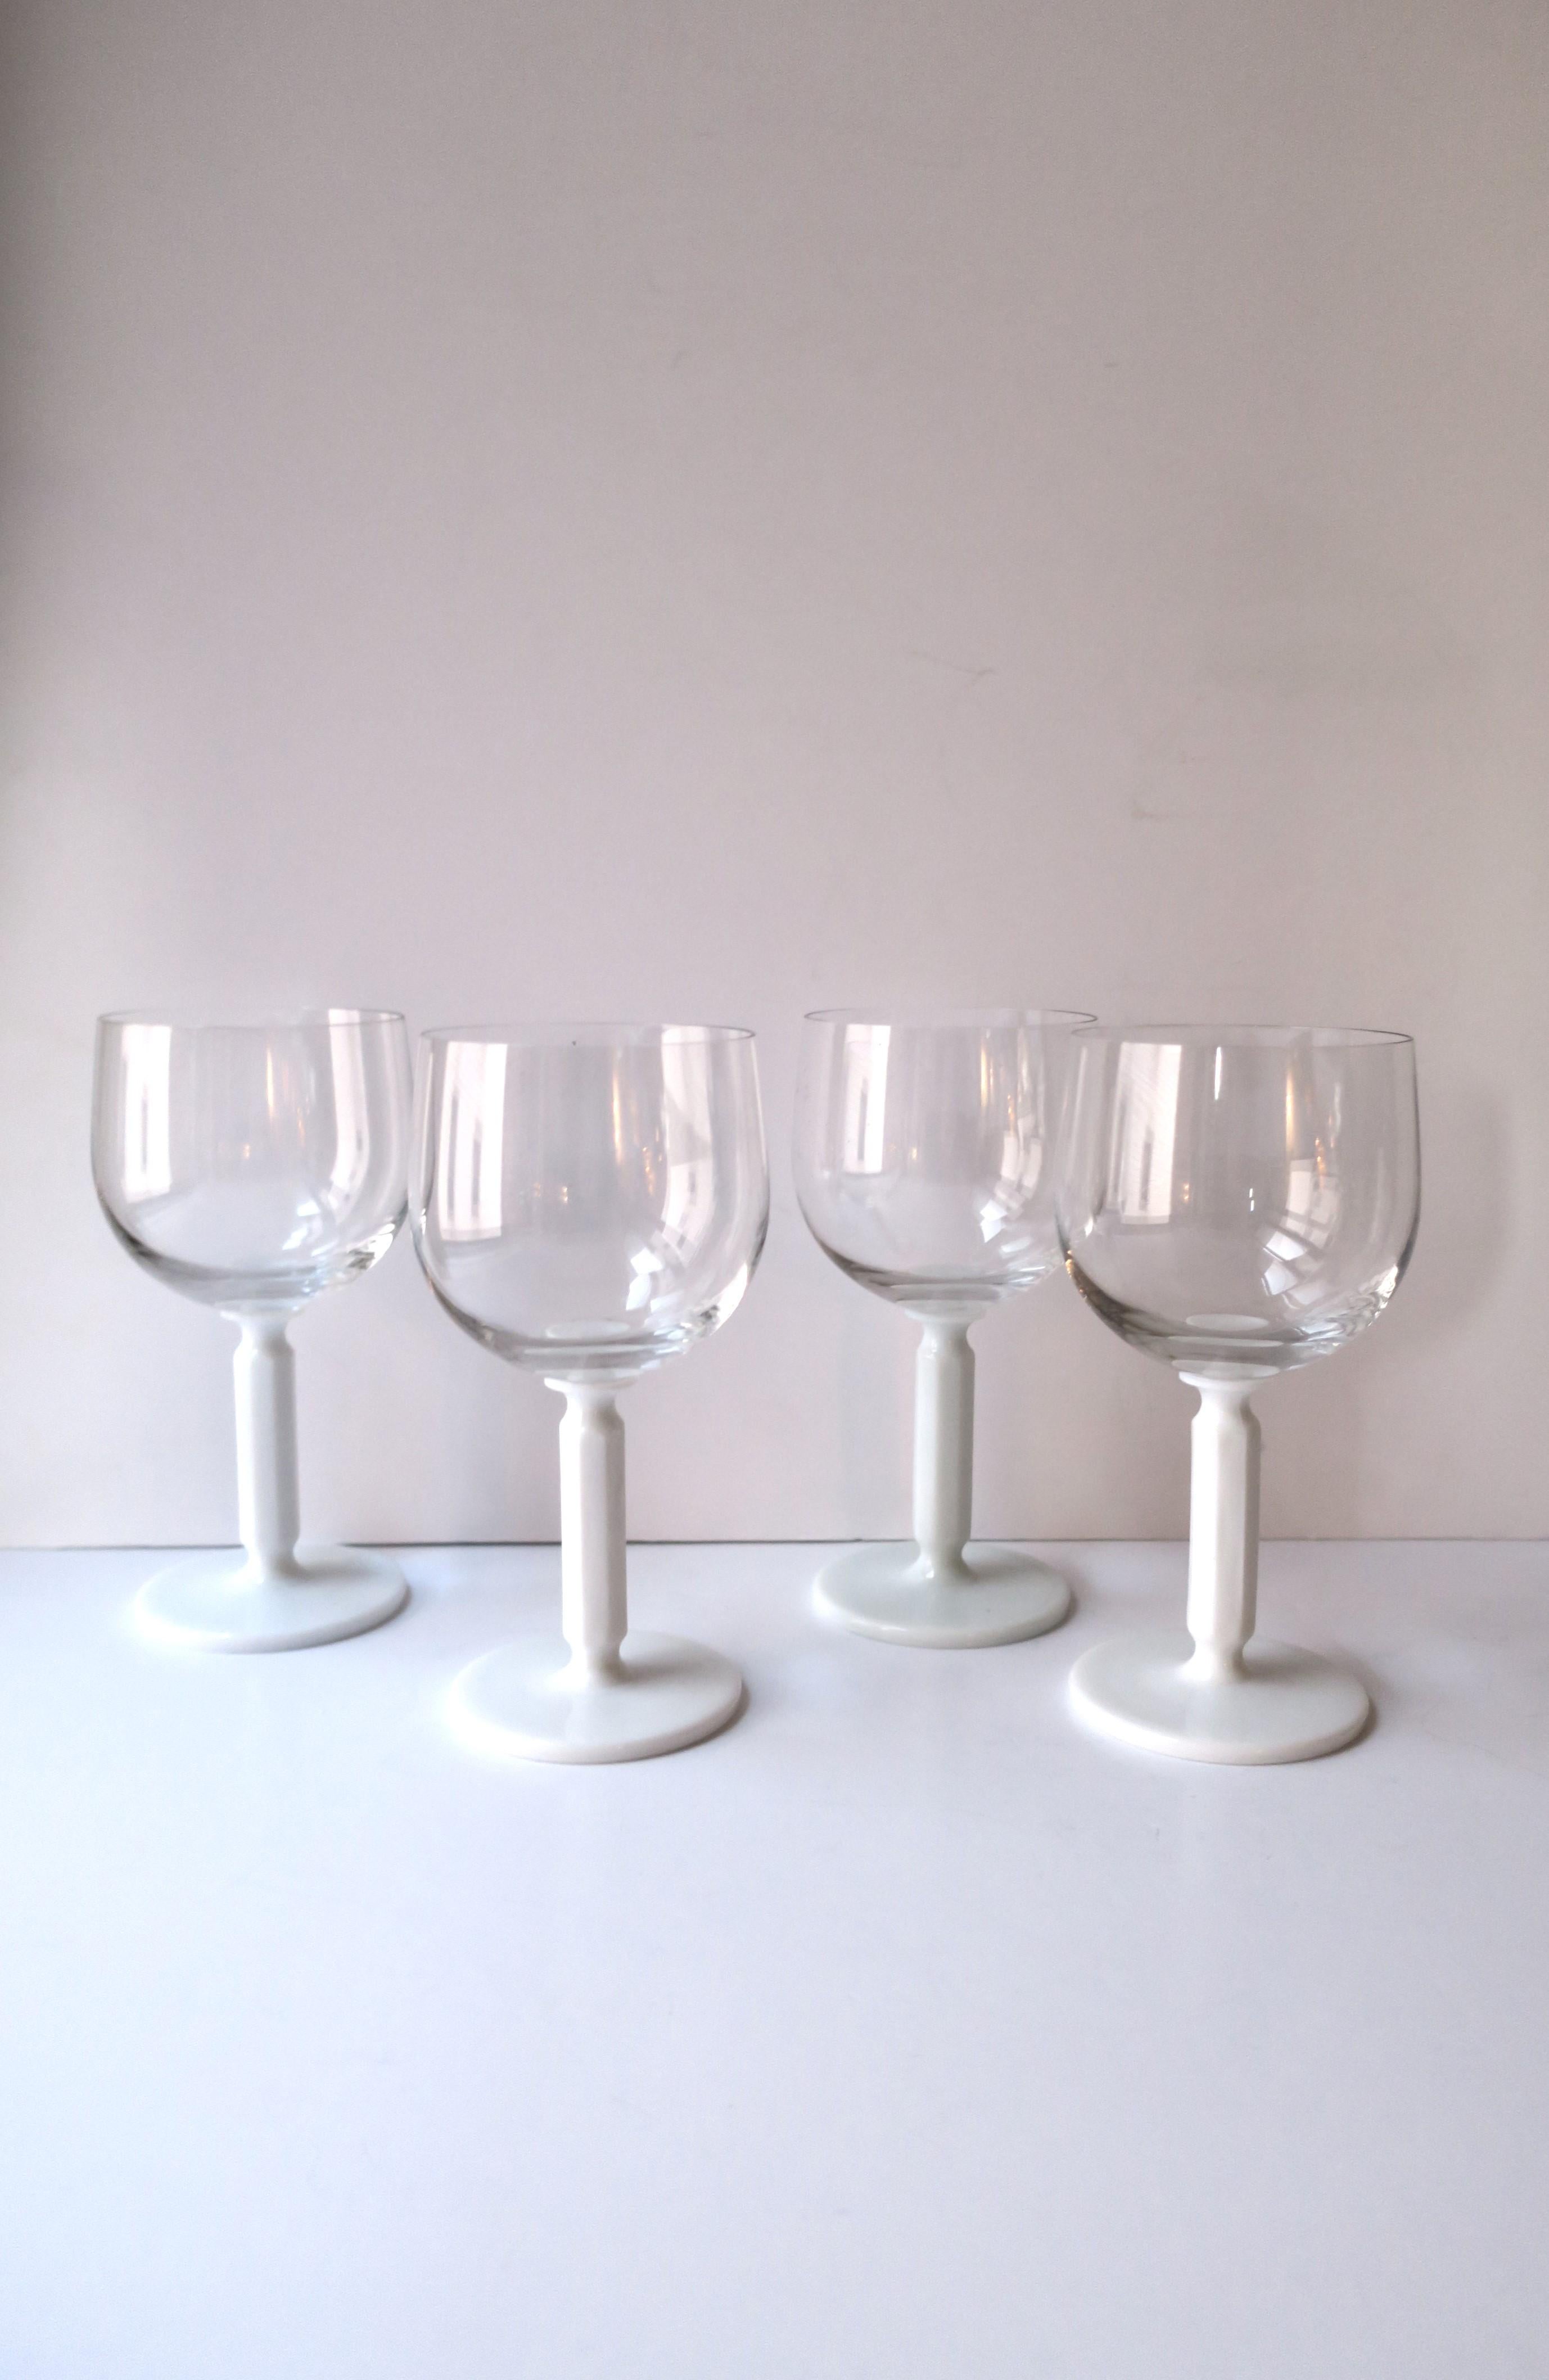 A beautiful and chic set of four (4) Rosenthal Studio-Line crystal water, wine or cocktail glasses with white opaque milk glass stem. White stem has an octagonal shape, which is a nice design detail. Set is in very good condition as shown, with no